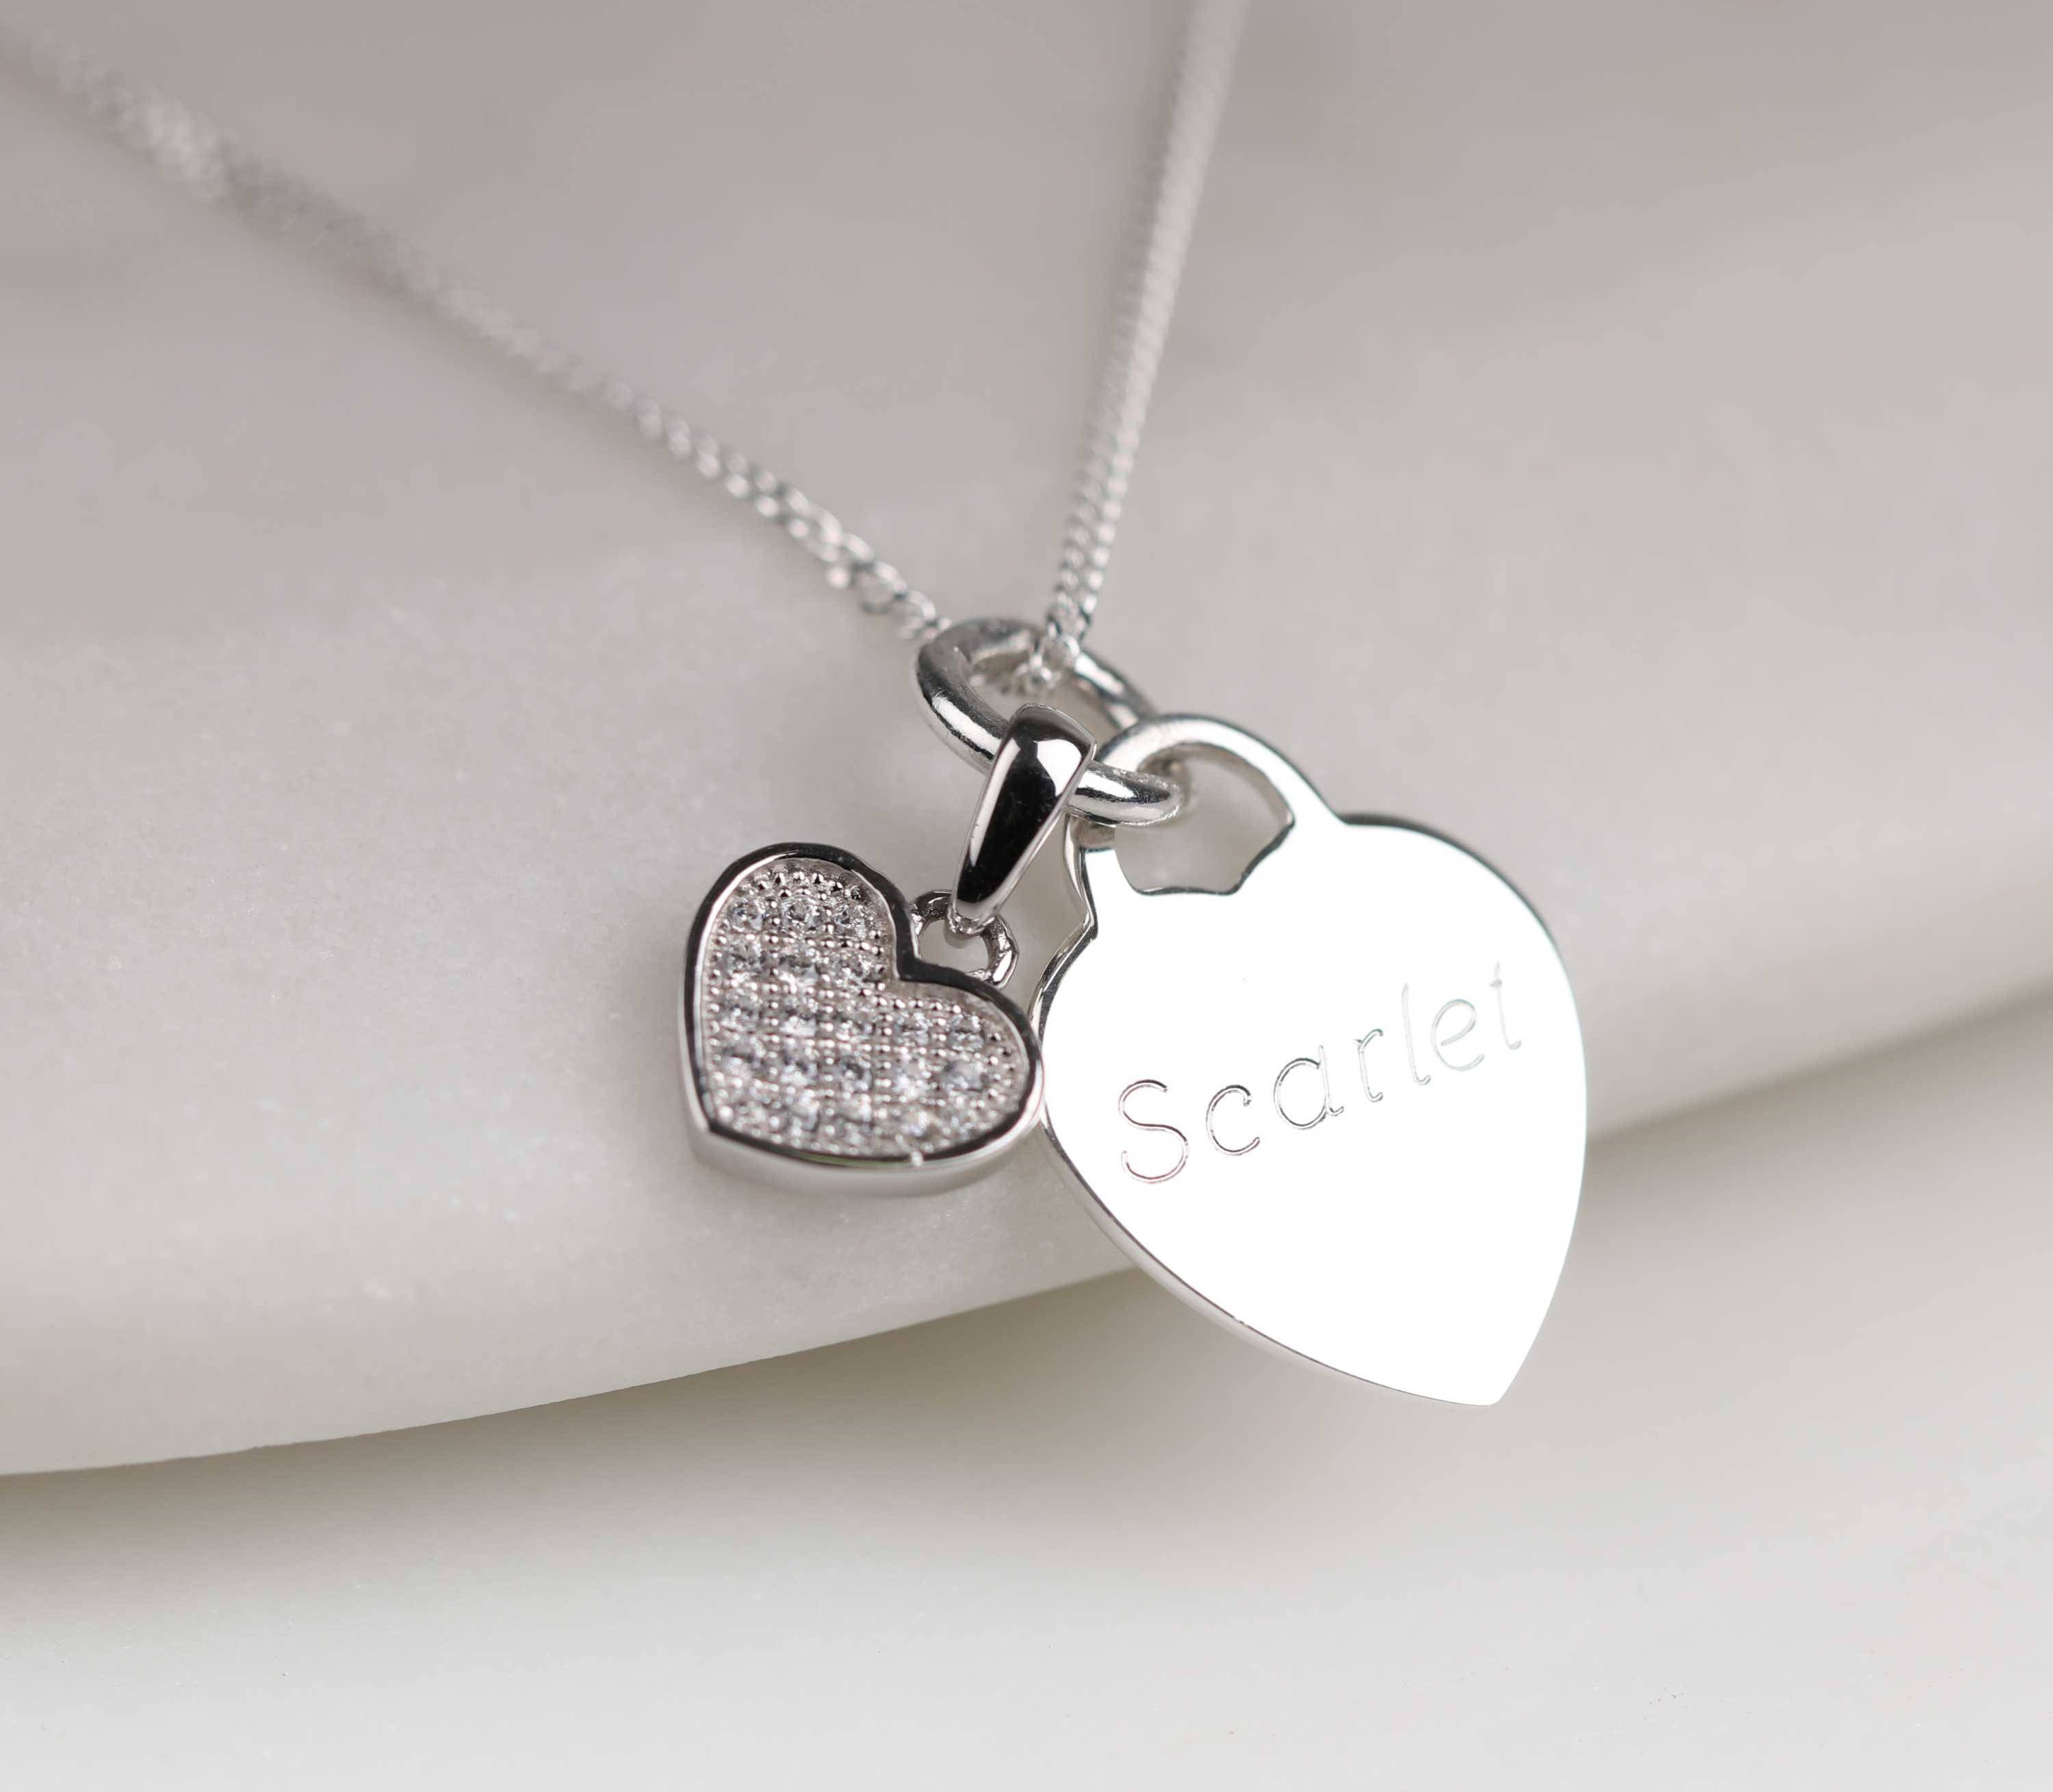 Hand Engraved Heart Locket Necklace - The M Jewelers